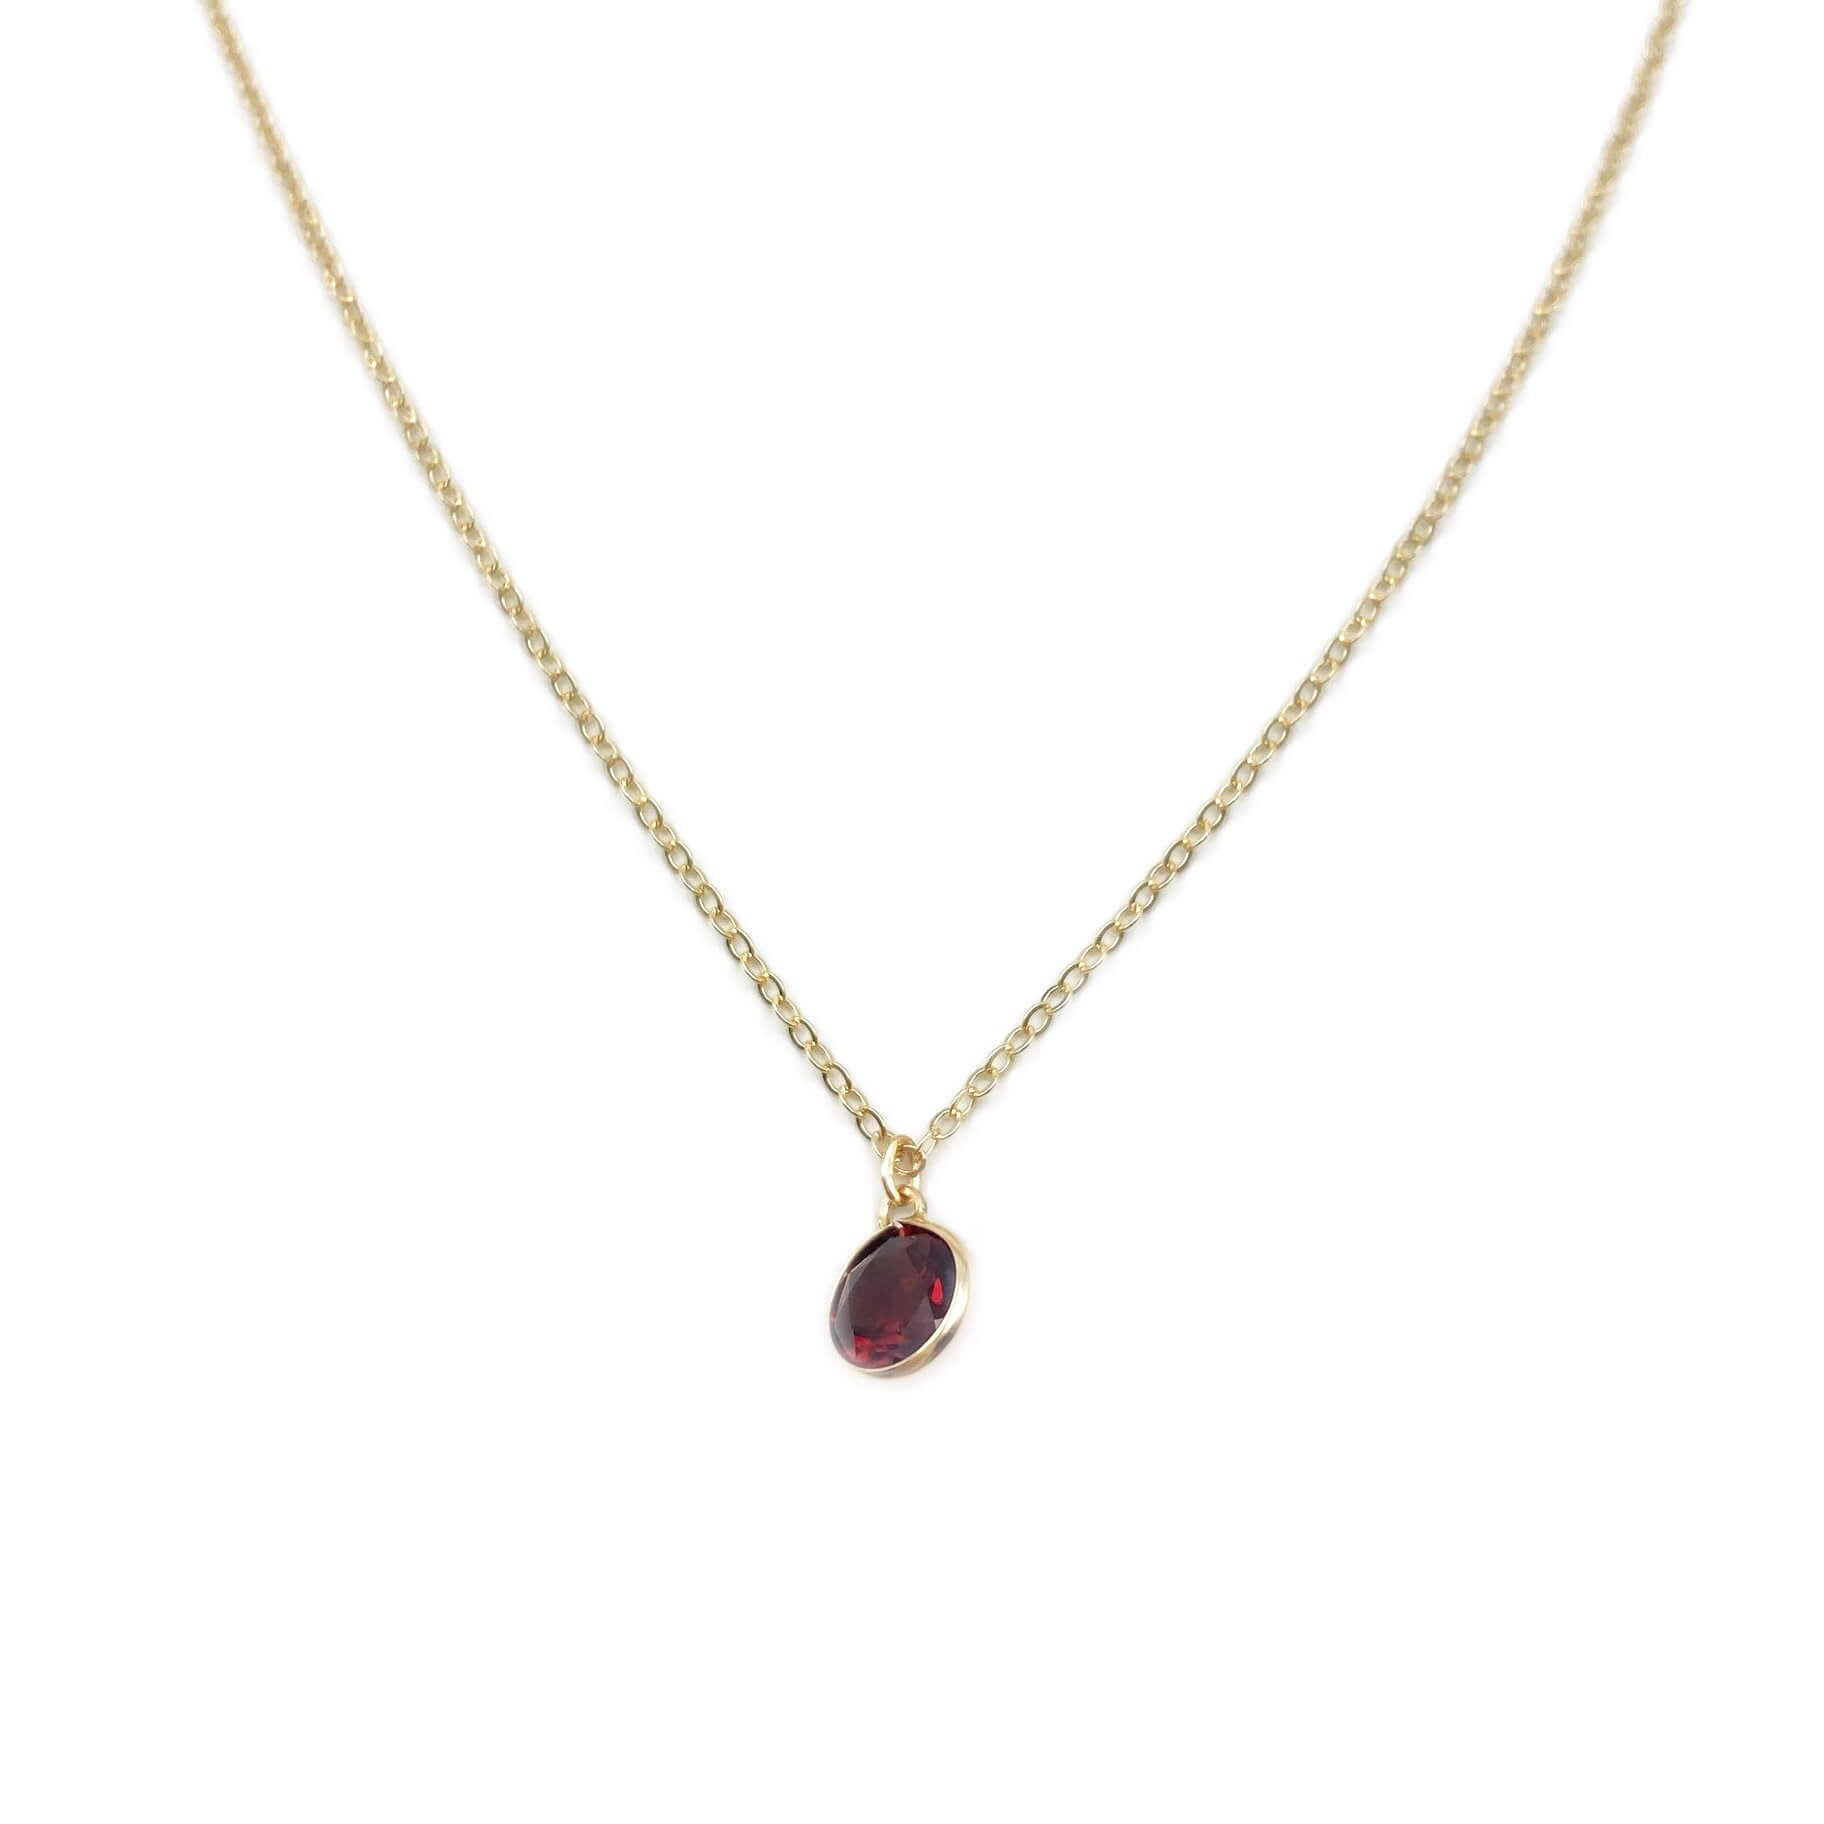 This is a 14k garnet necklace that is made of 14k bezel set garnet with 14k gold chain.